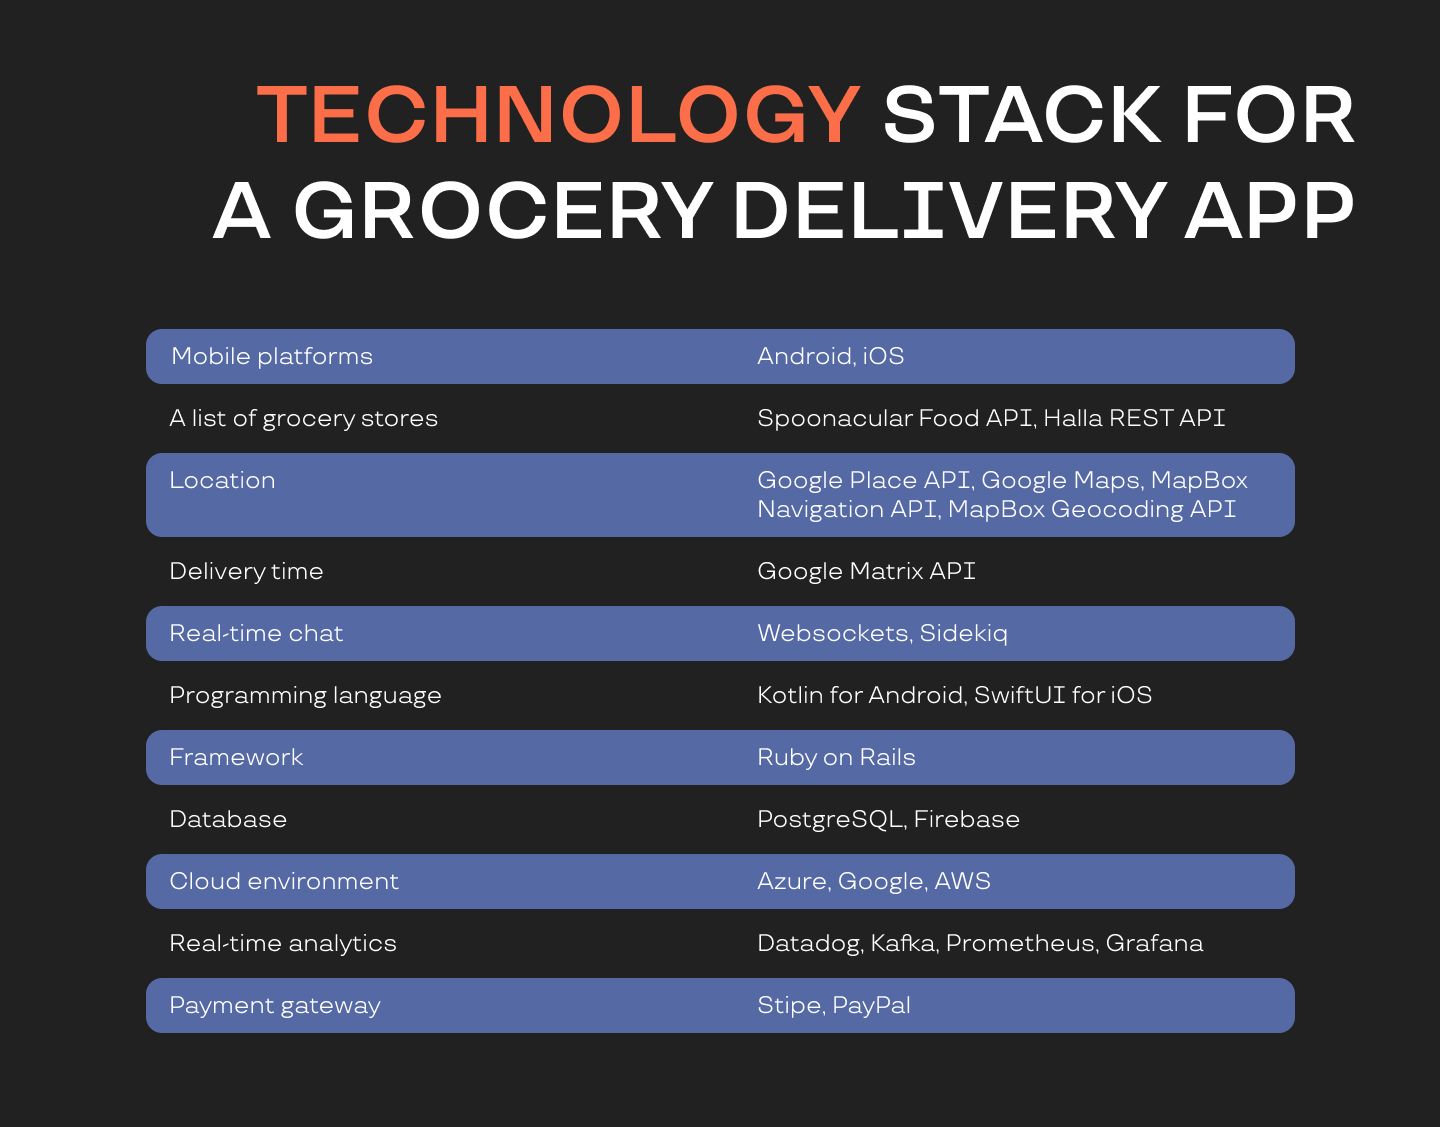 Technology stack for a grocery delivery app